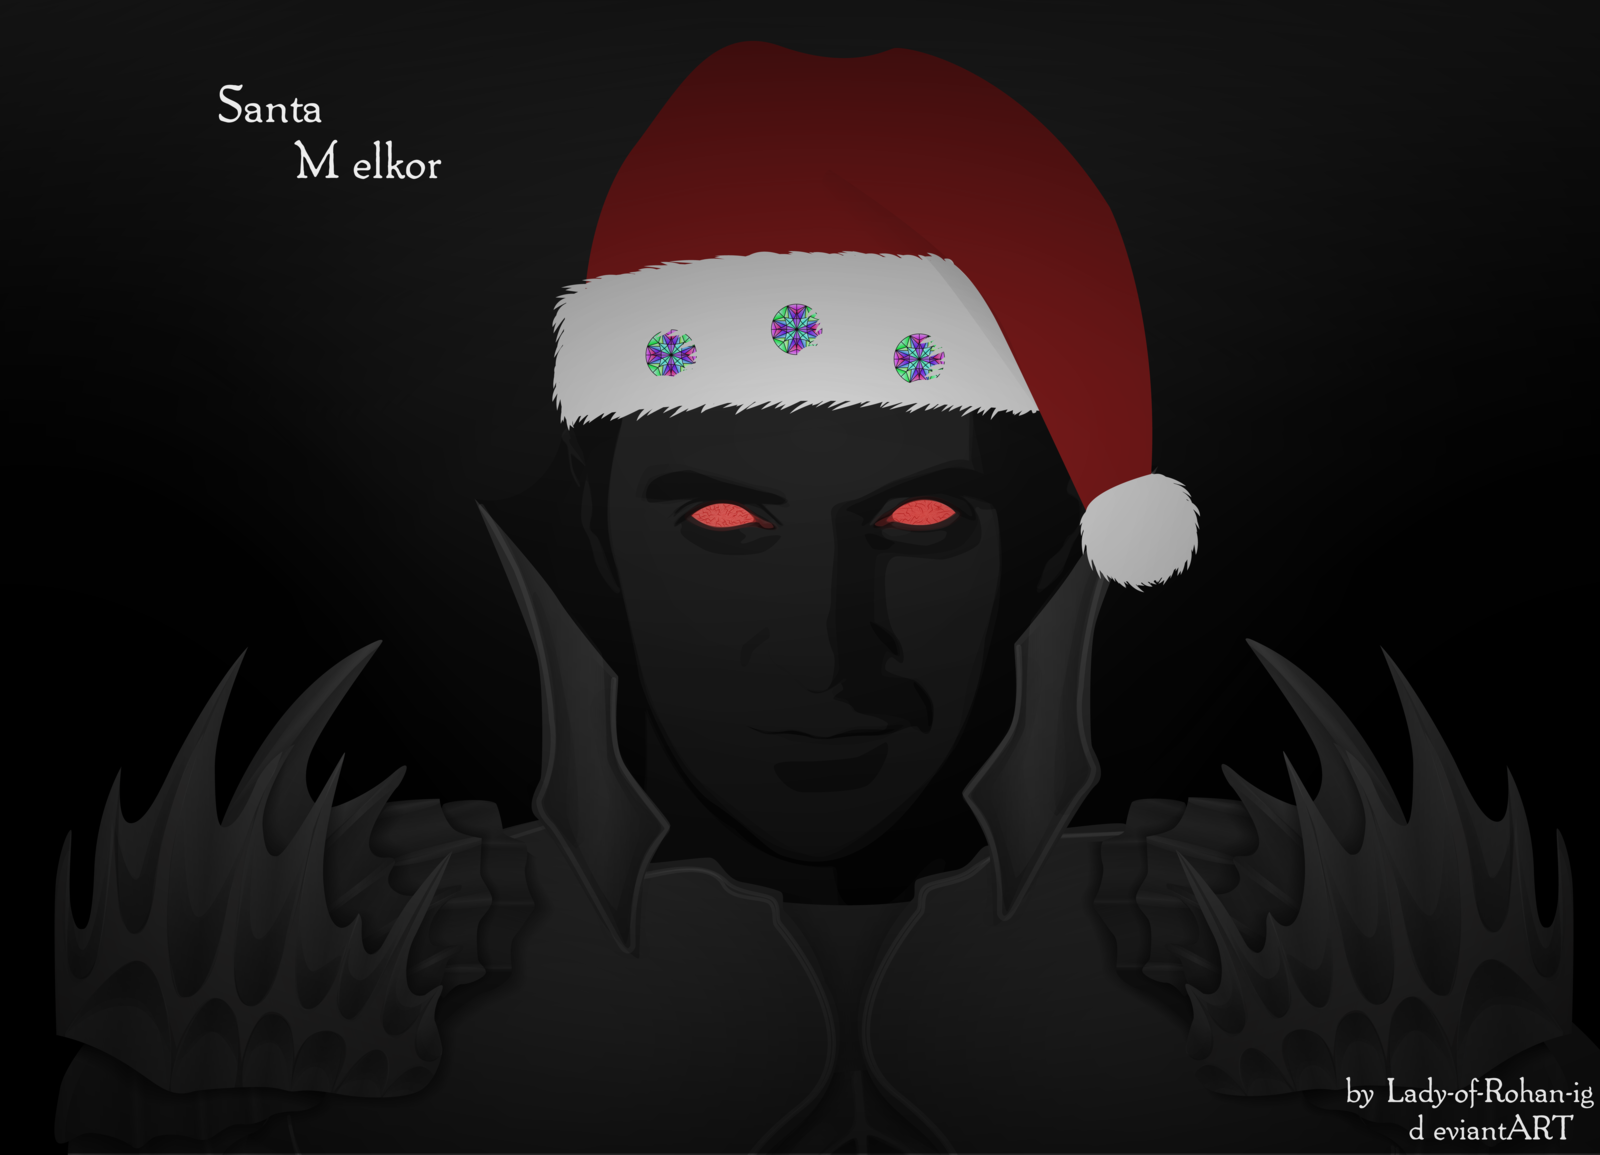 santa_melkor_by_lady_of_rohan_ig-d8axq3d.png